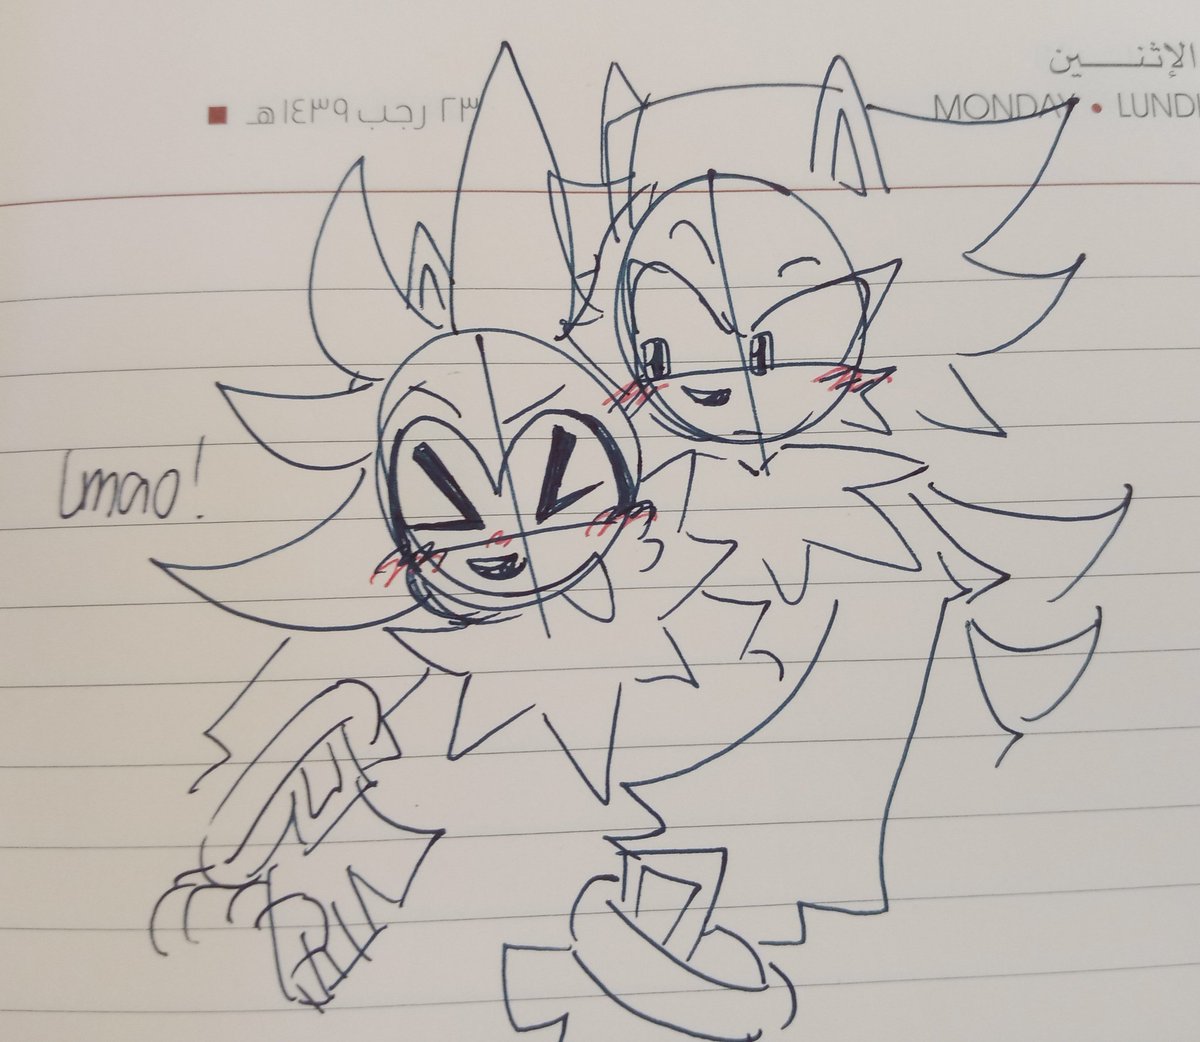 i love drawing gay hedgehogs in class #shadilver